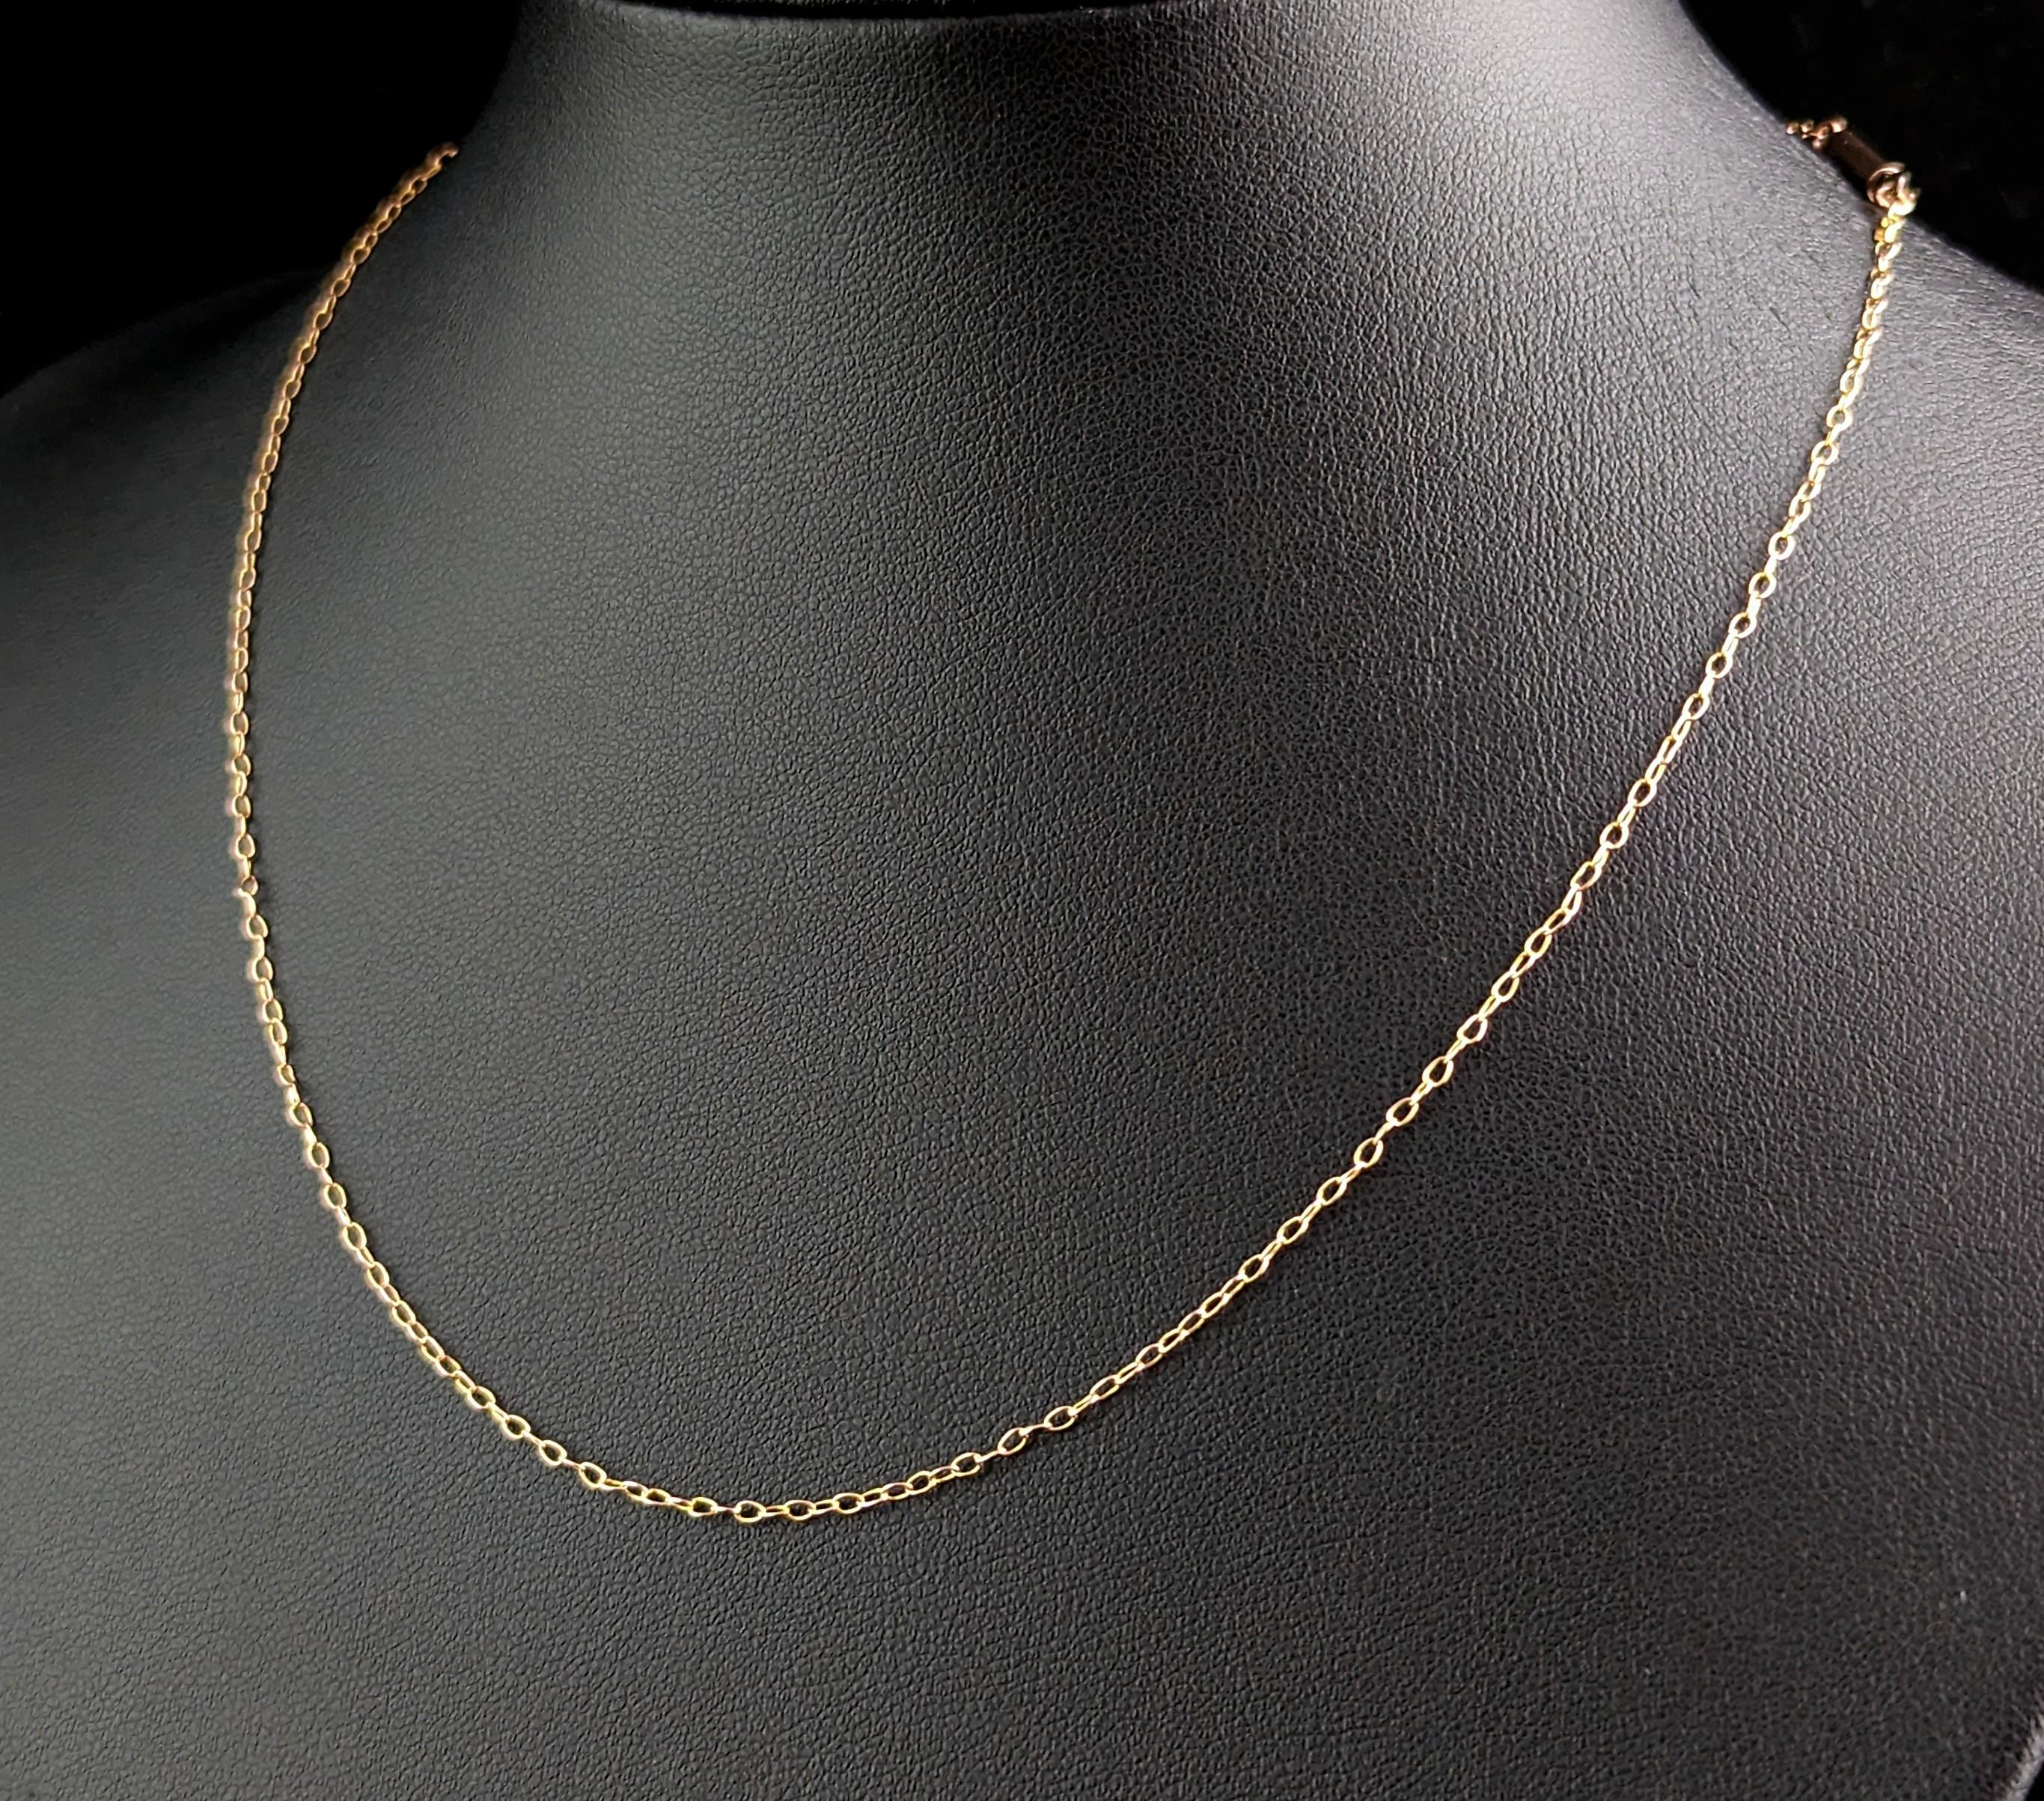 A fine dainty antique 9kt gold trace chain such as this is the perfect accompaniment to your favourite small lockets, pendants and charms.

It is a fine trace link in a warm yellow gold with an antique barrel fastener.

It is a good length and will